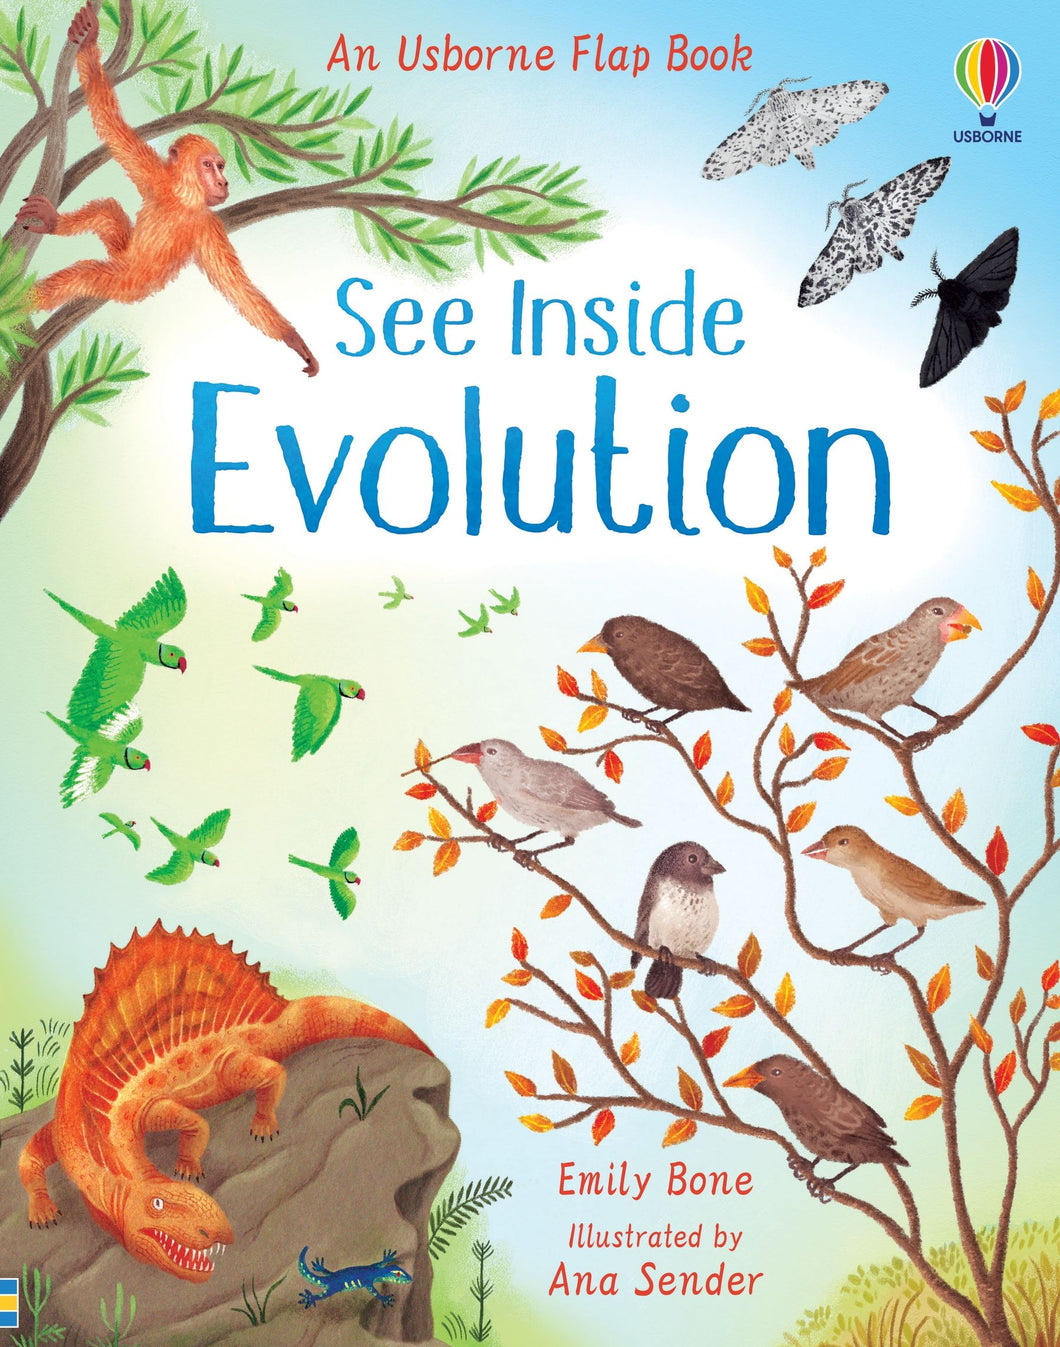 See Inside Evolution book cover shows a blue sky with illustrations of various creatures (moths, birds, dinosaurs, birds, ape)